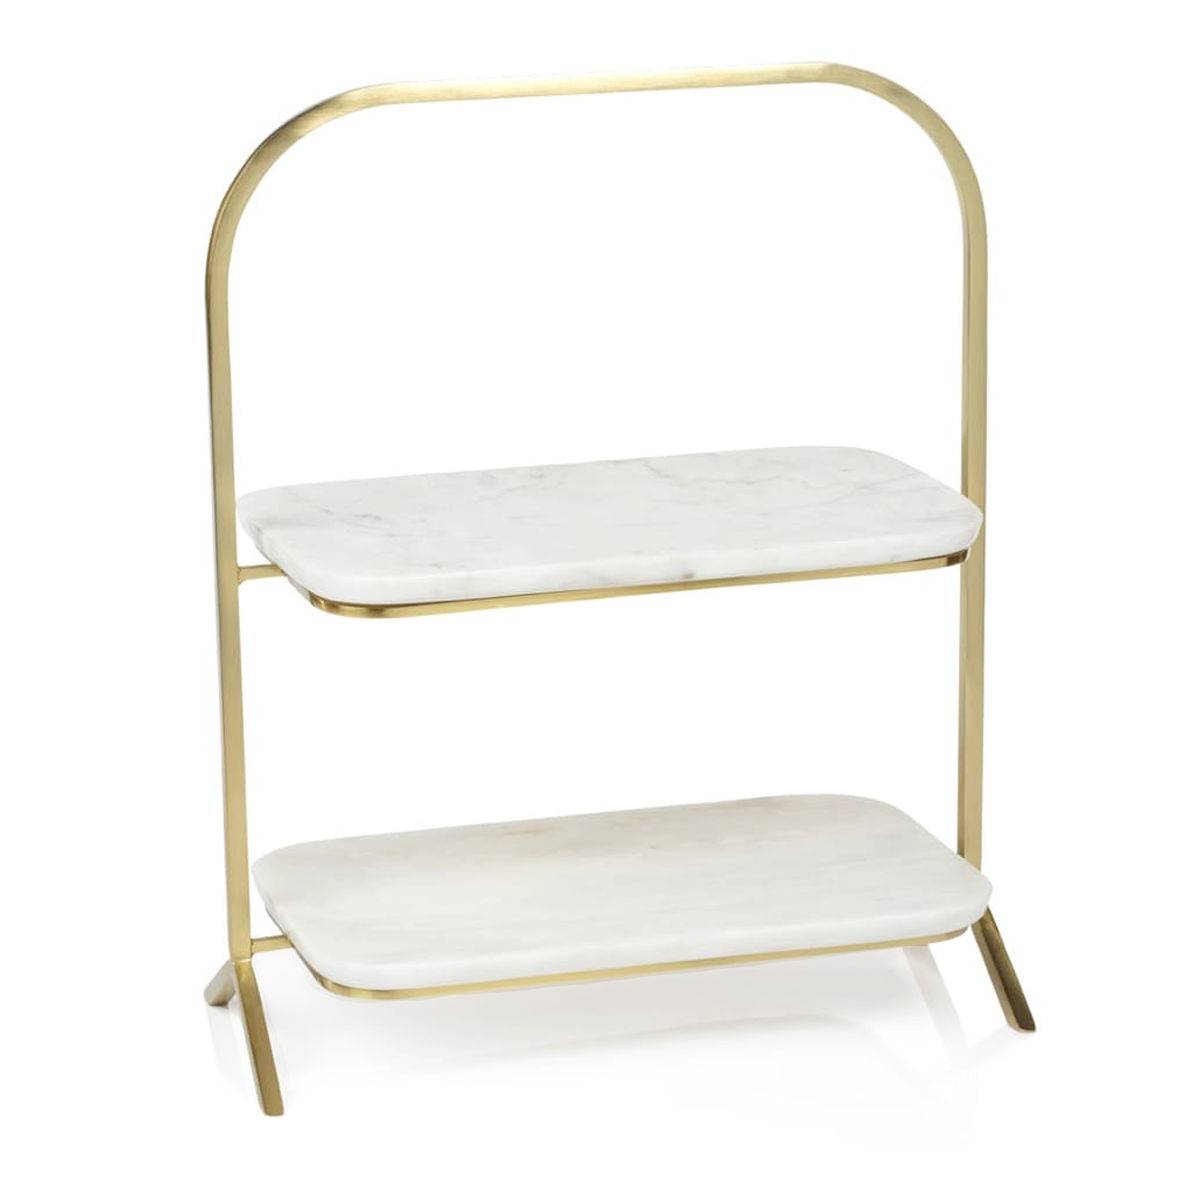 Two-Tier Marble Serving Stand, Zodax - RSVP Style